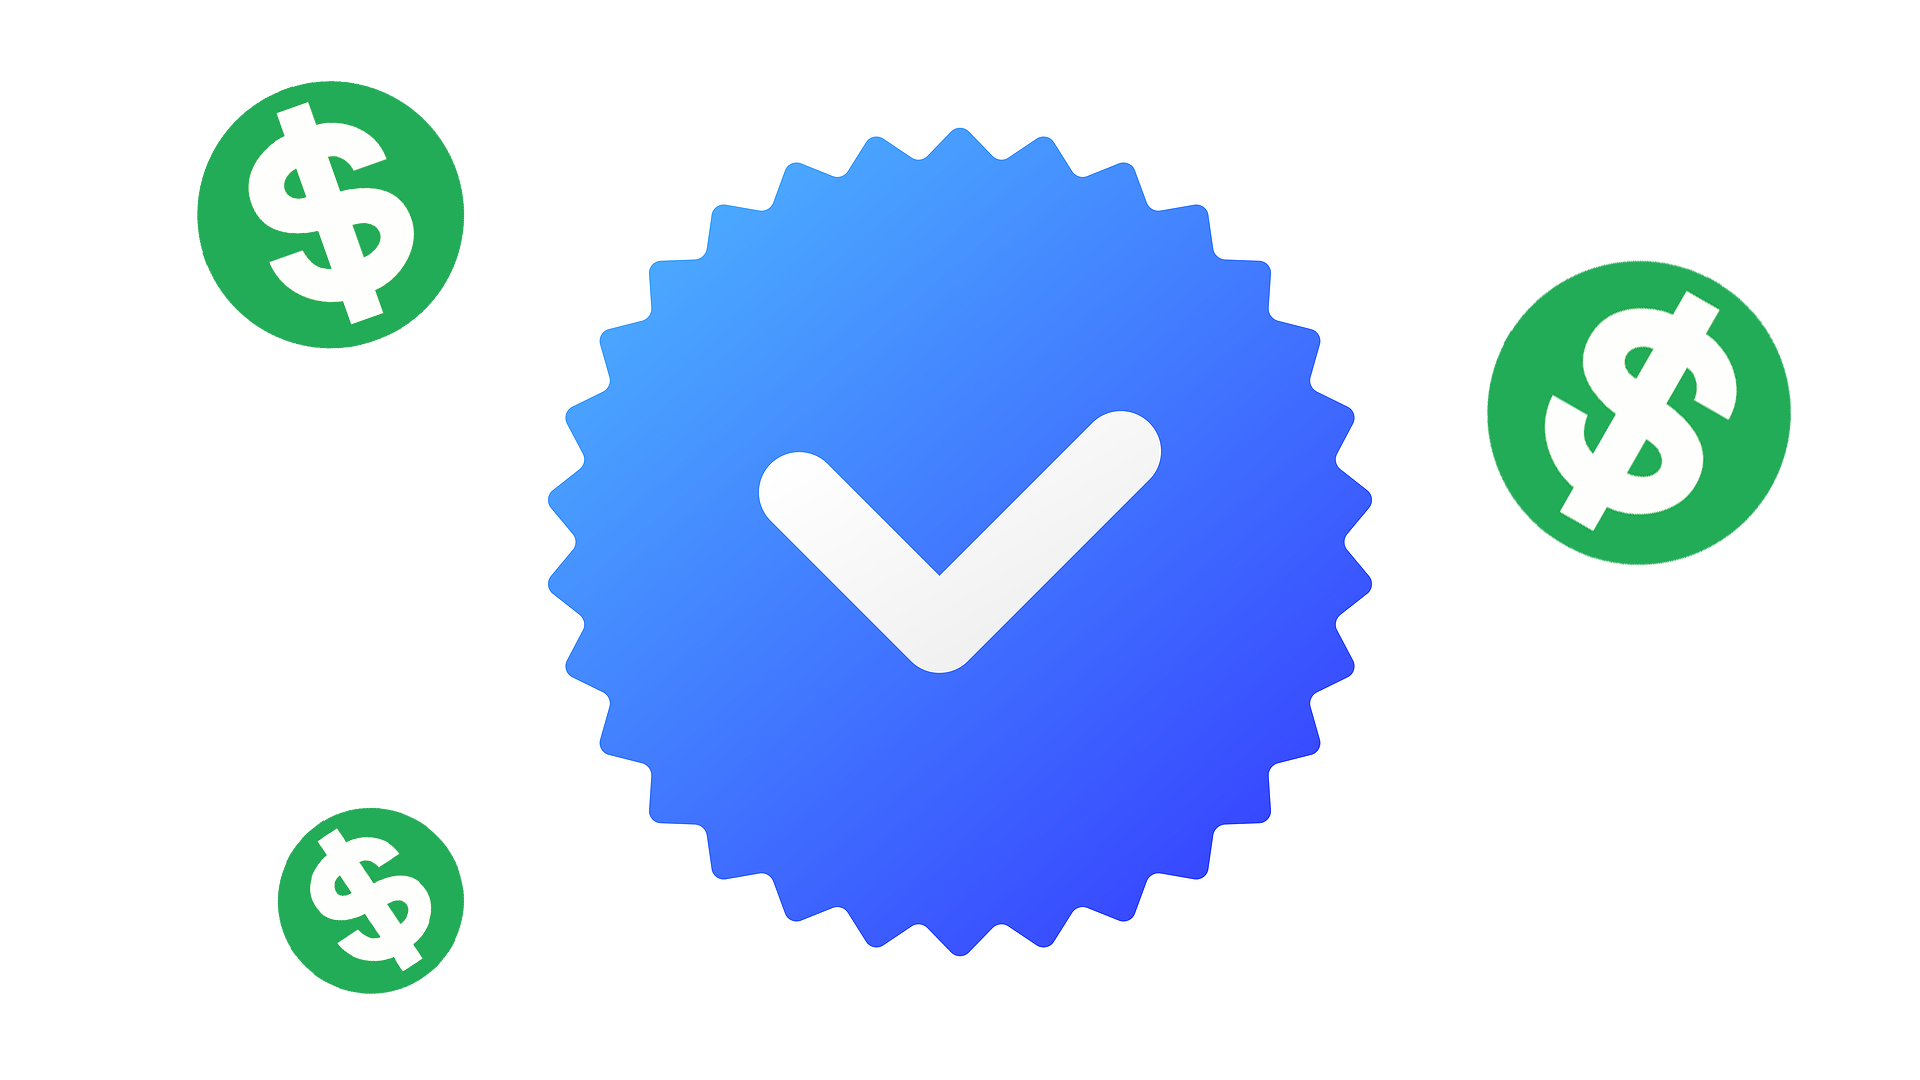 Blue verification checkmark with green dollar signs around it.